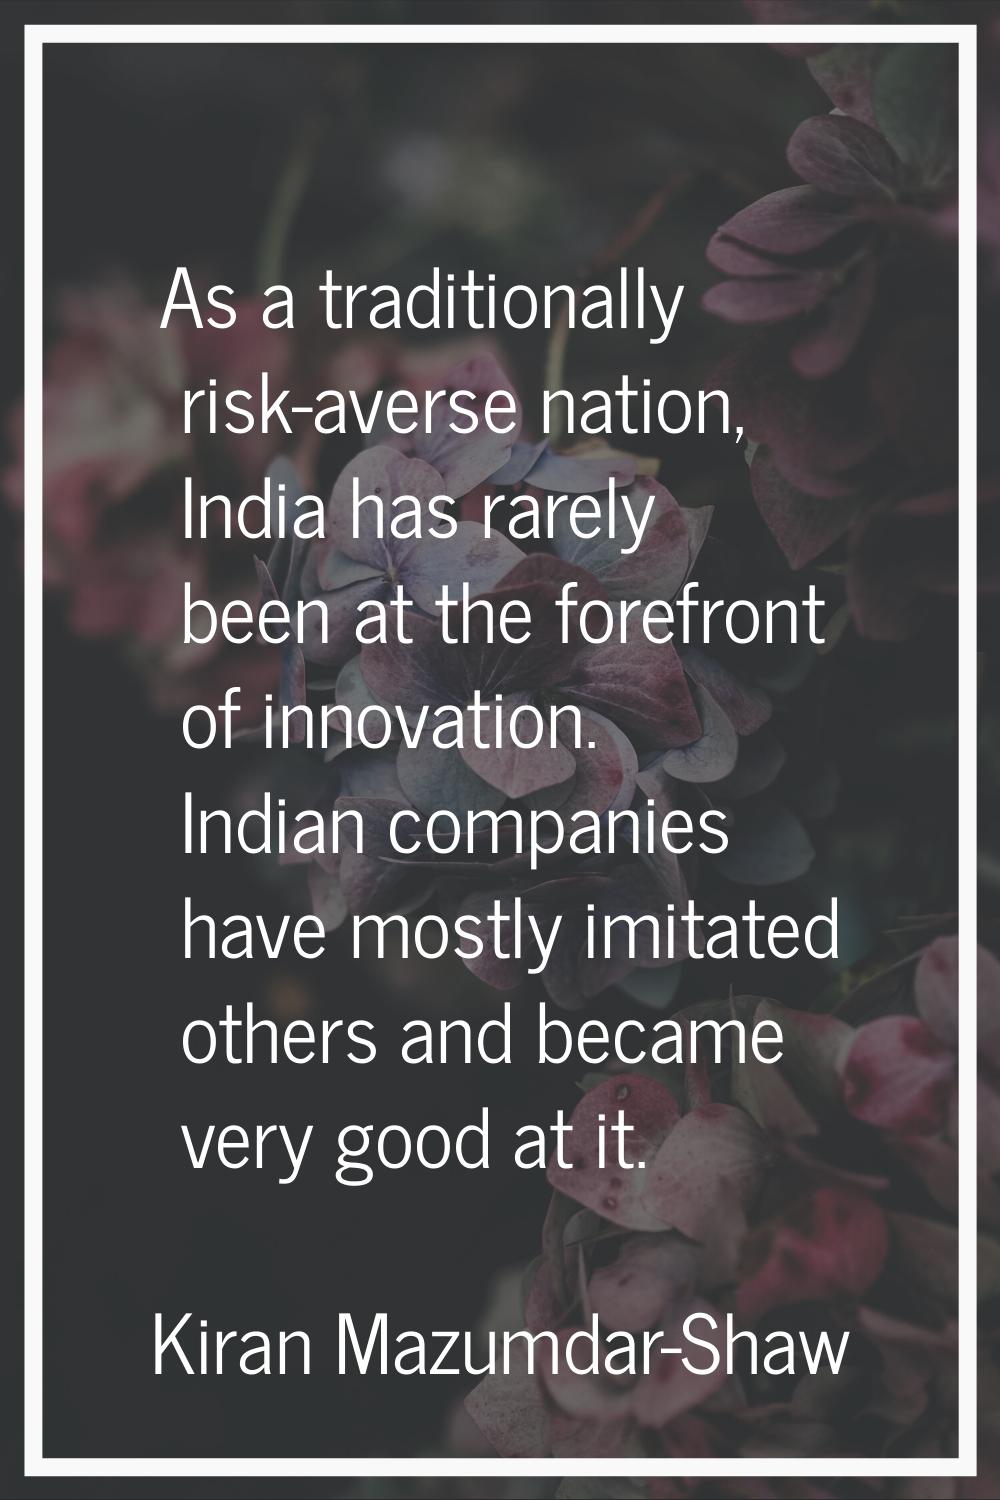 As a traditionally risk-averse nation, India has rarely been at the forefront of innovation. Indian